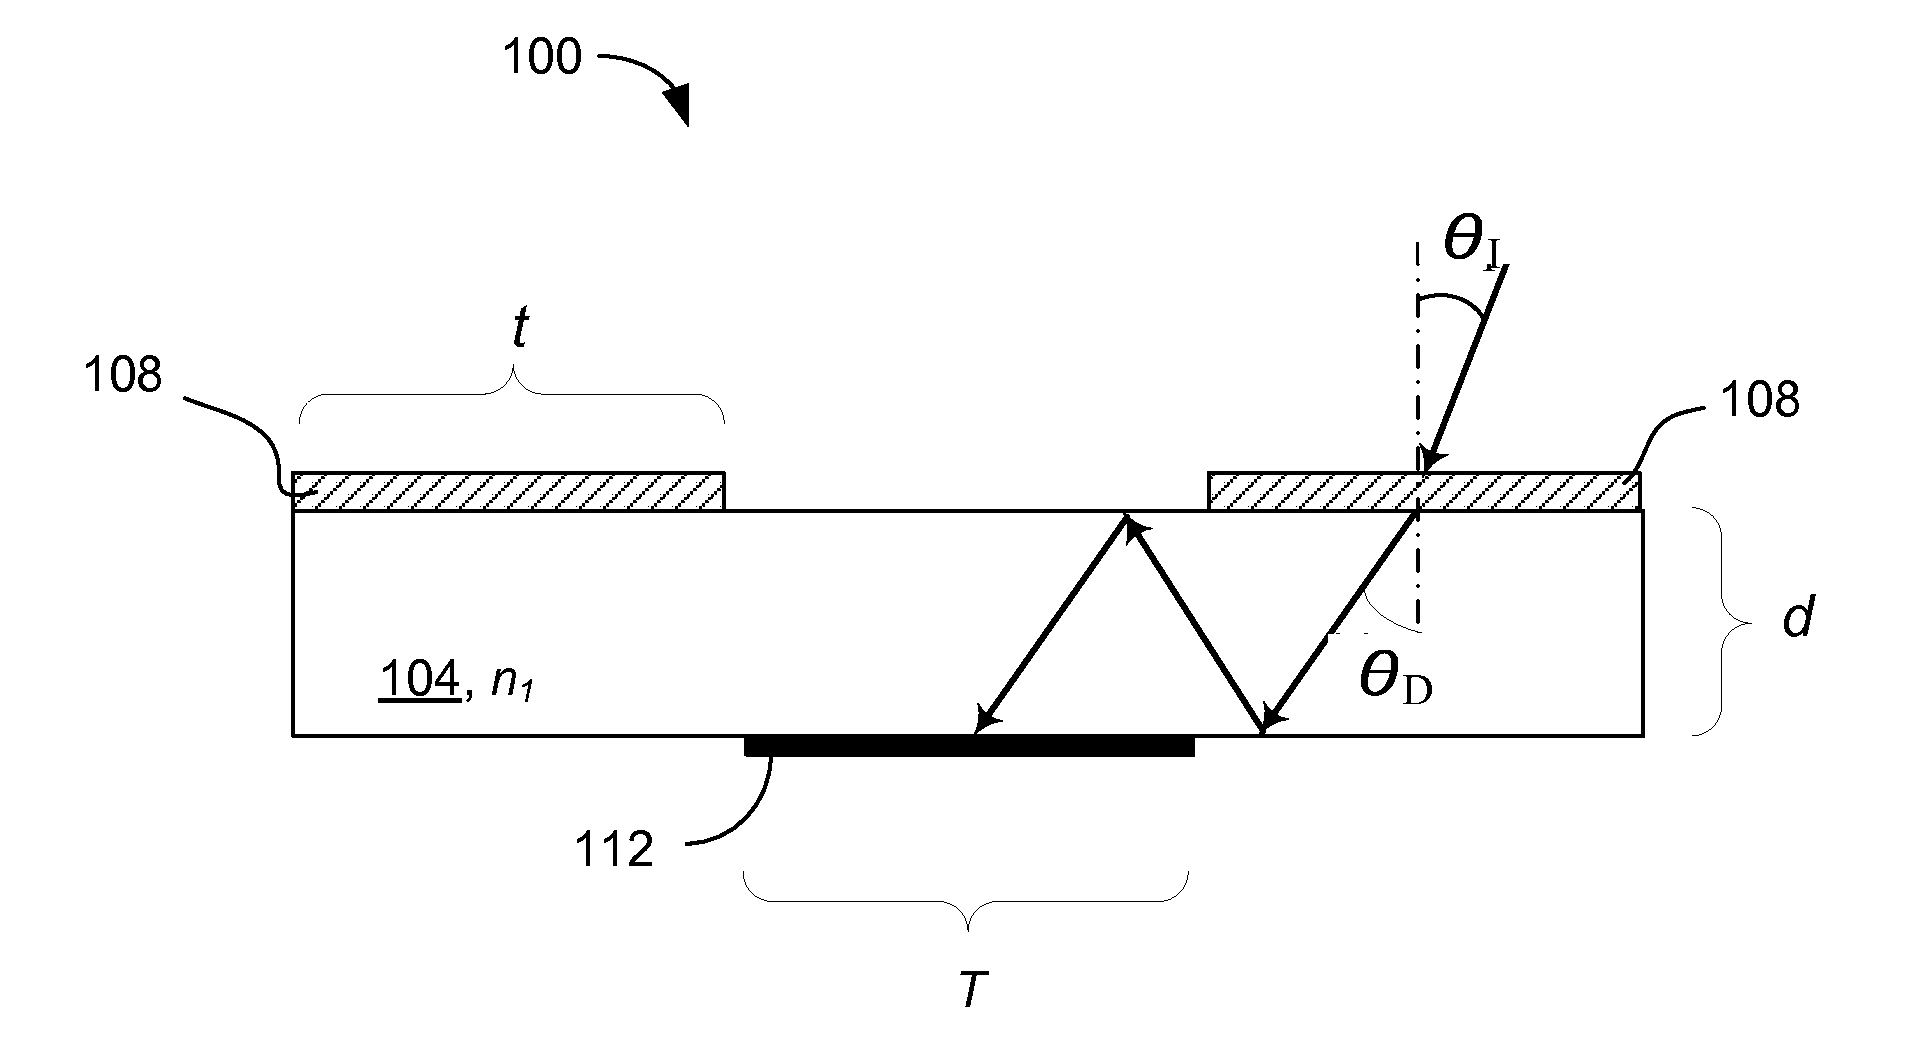 Non-latitude and vertically mounted solar energy concentrators